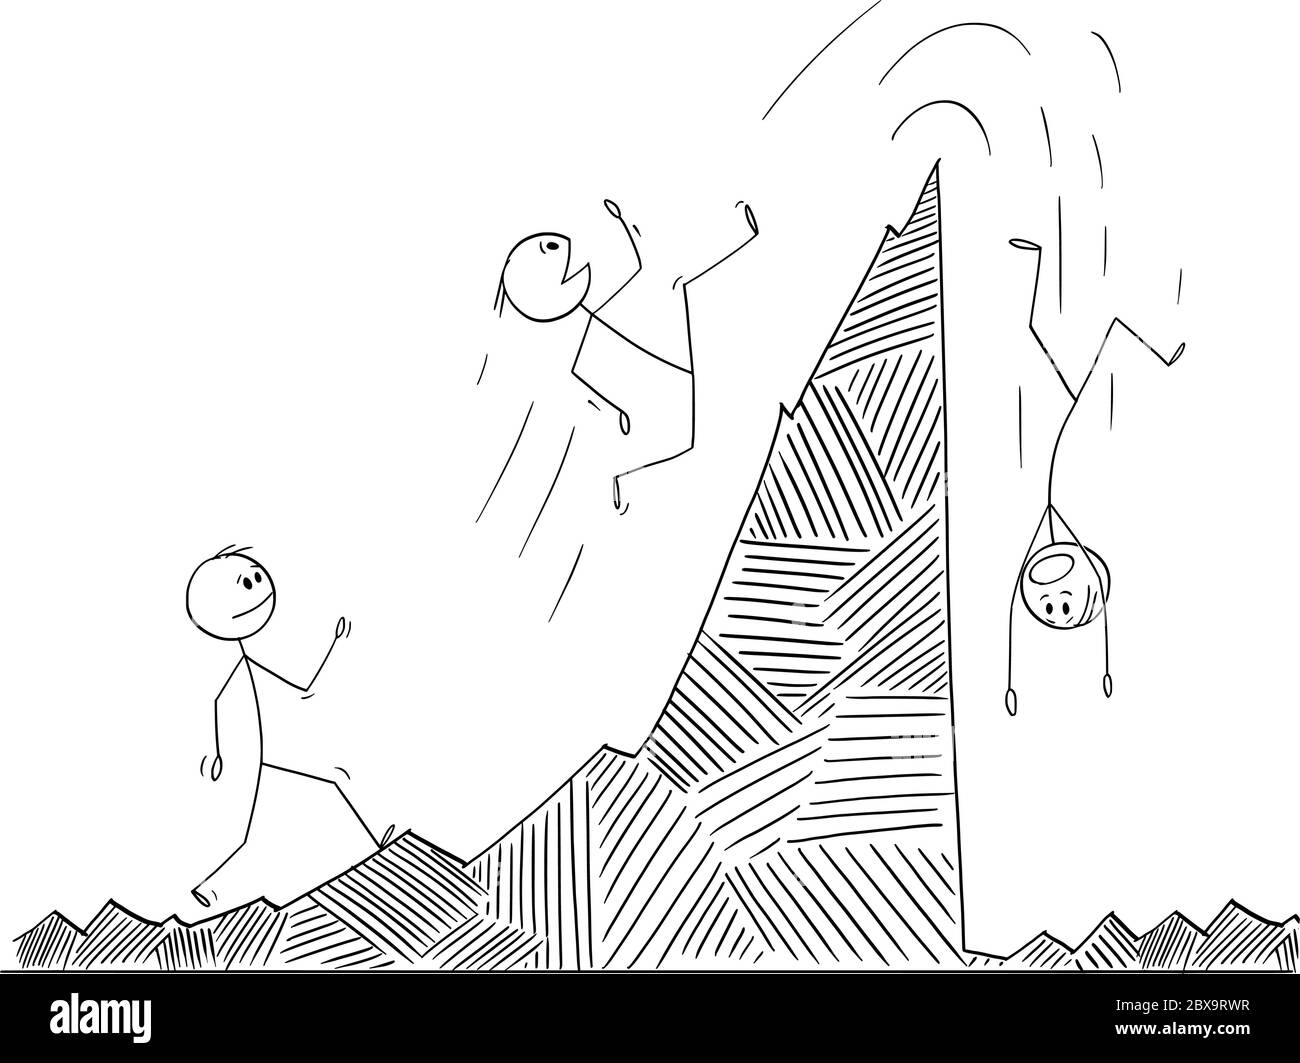 Vector cartoon stick figure drawing conceptual illustration of man, businessman or stock investor walking and falling on the financial graph. Market cycle concept. Stock Vector